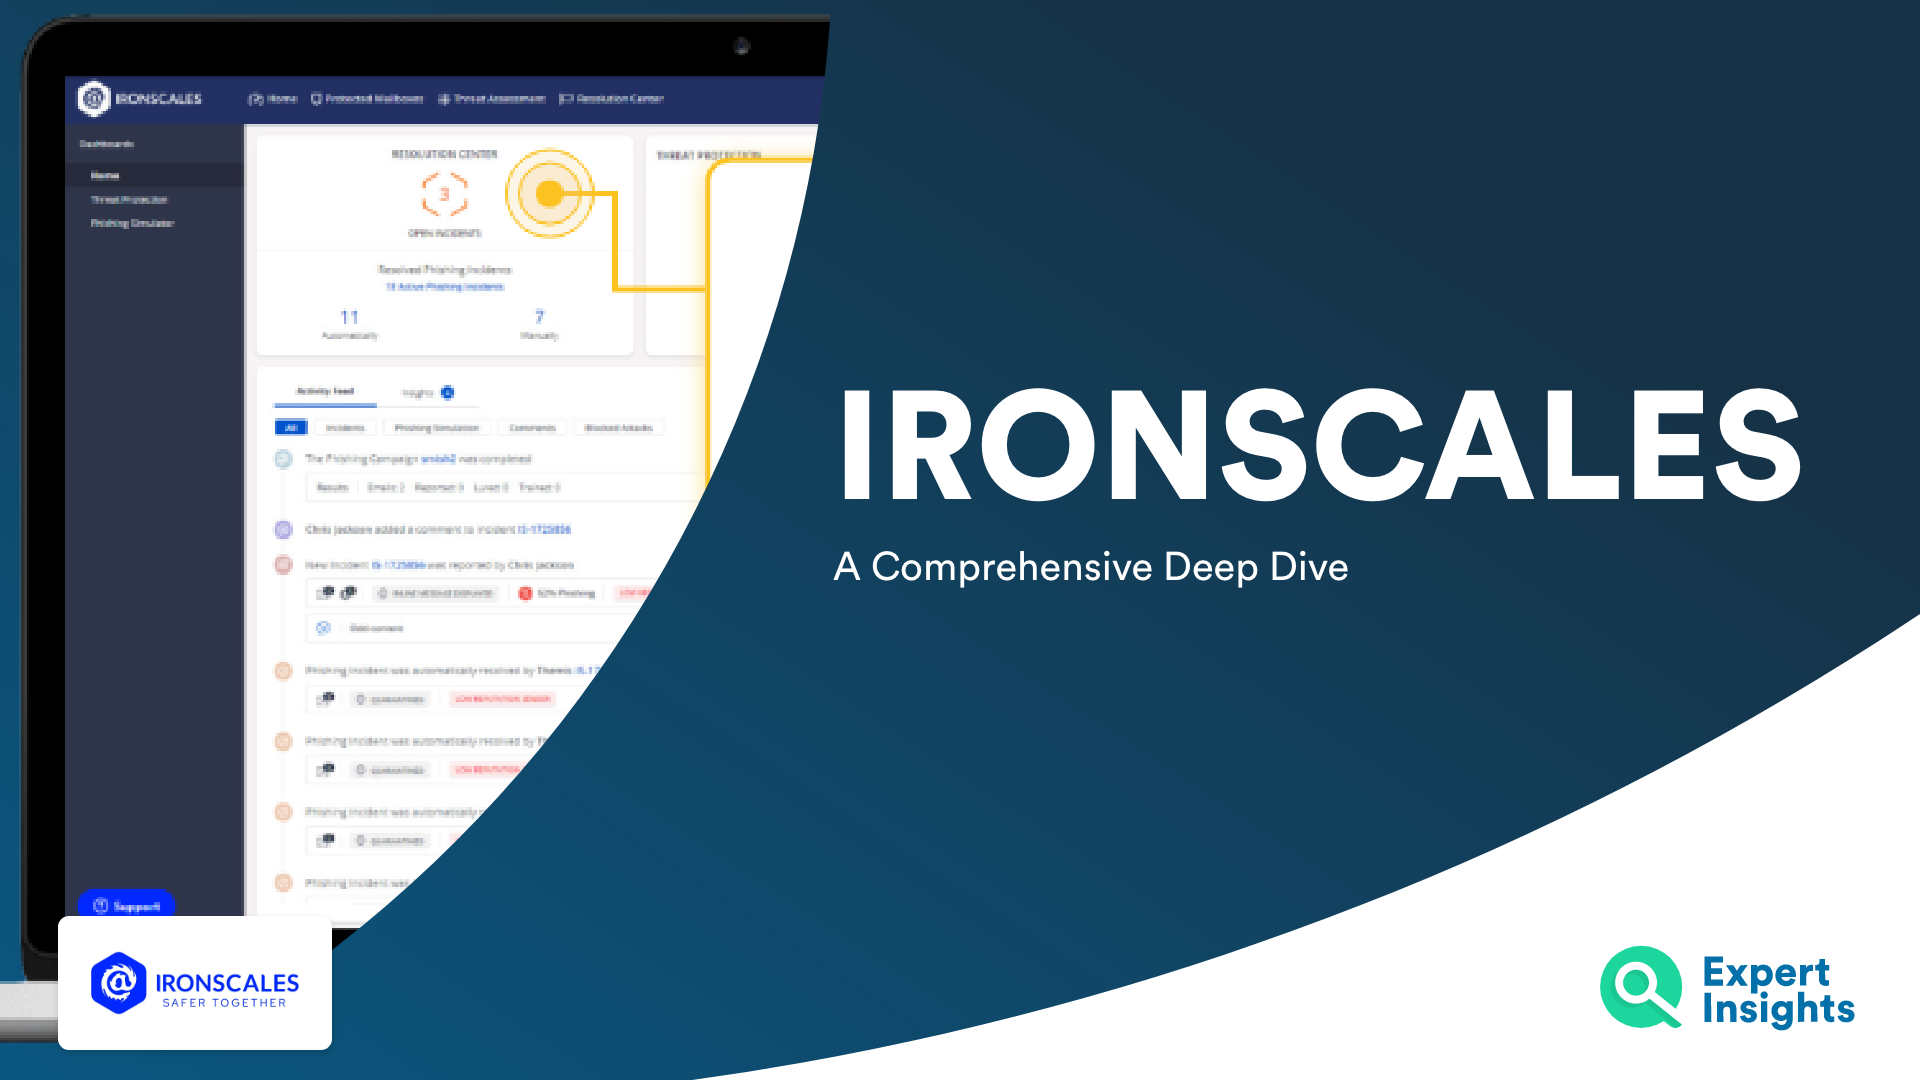 Ironscales Overview